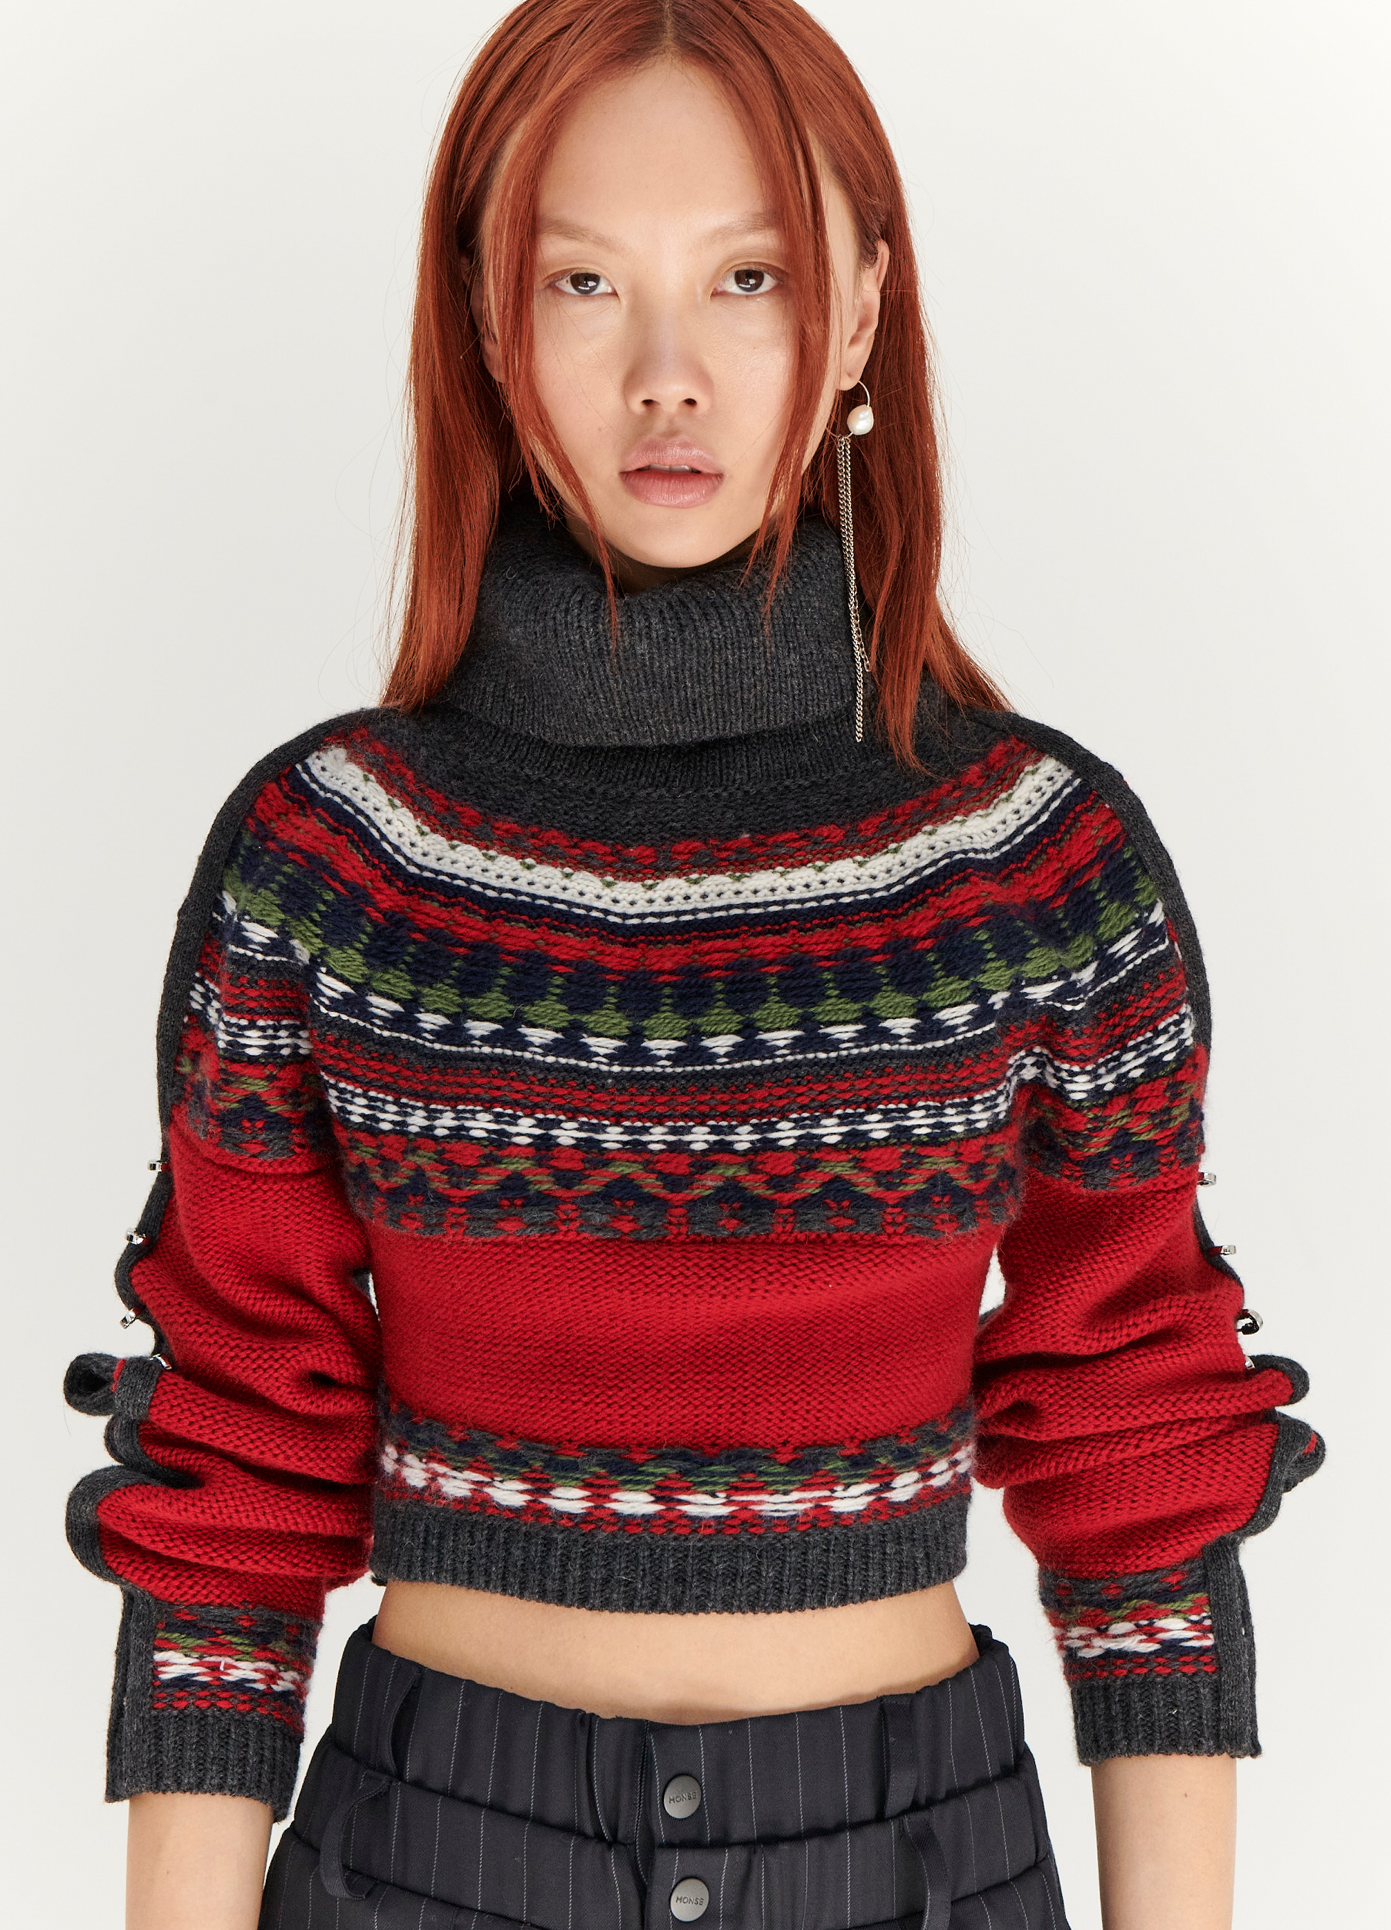 MONSE Cropped Fairisle Turtleneck Sweater  in Red and Charcoal on model front view